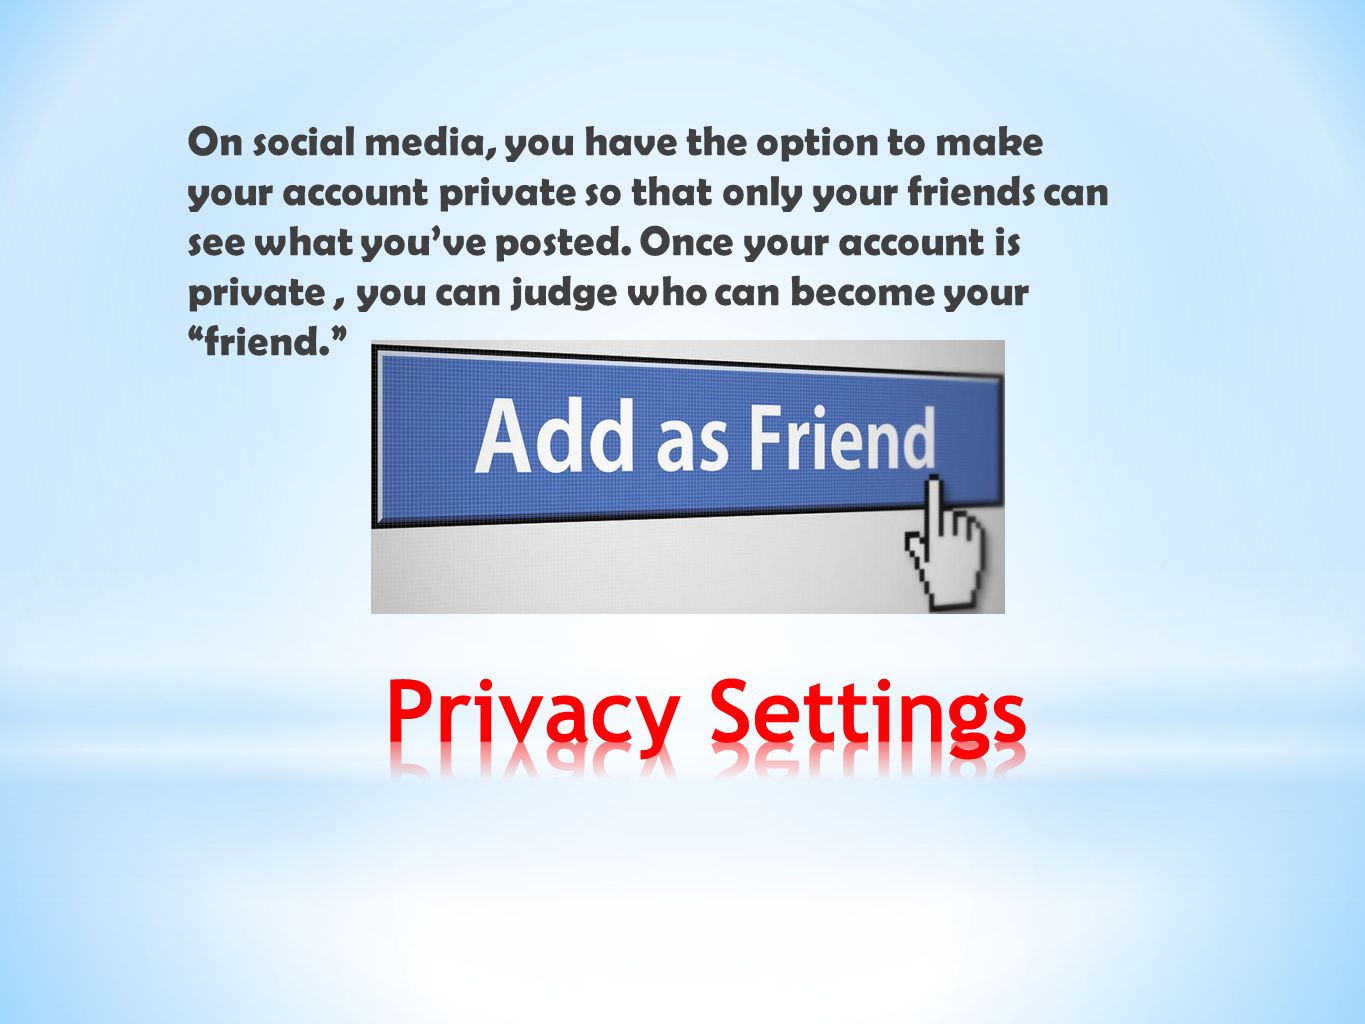 On social media, you have the option to make your account private so that only your friends can see what you’ve posted. Once your account is private , you can judge who can become your friend.